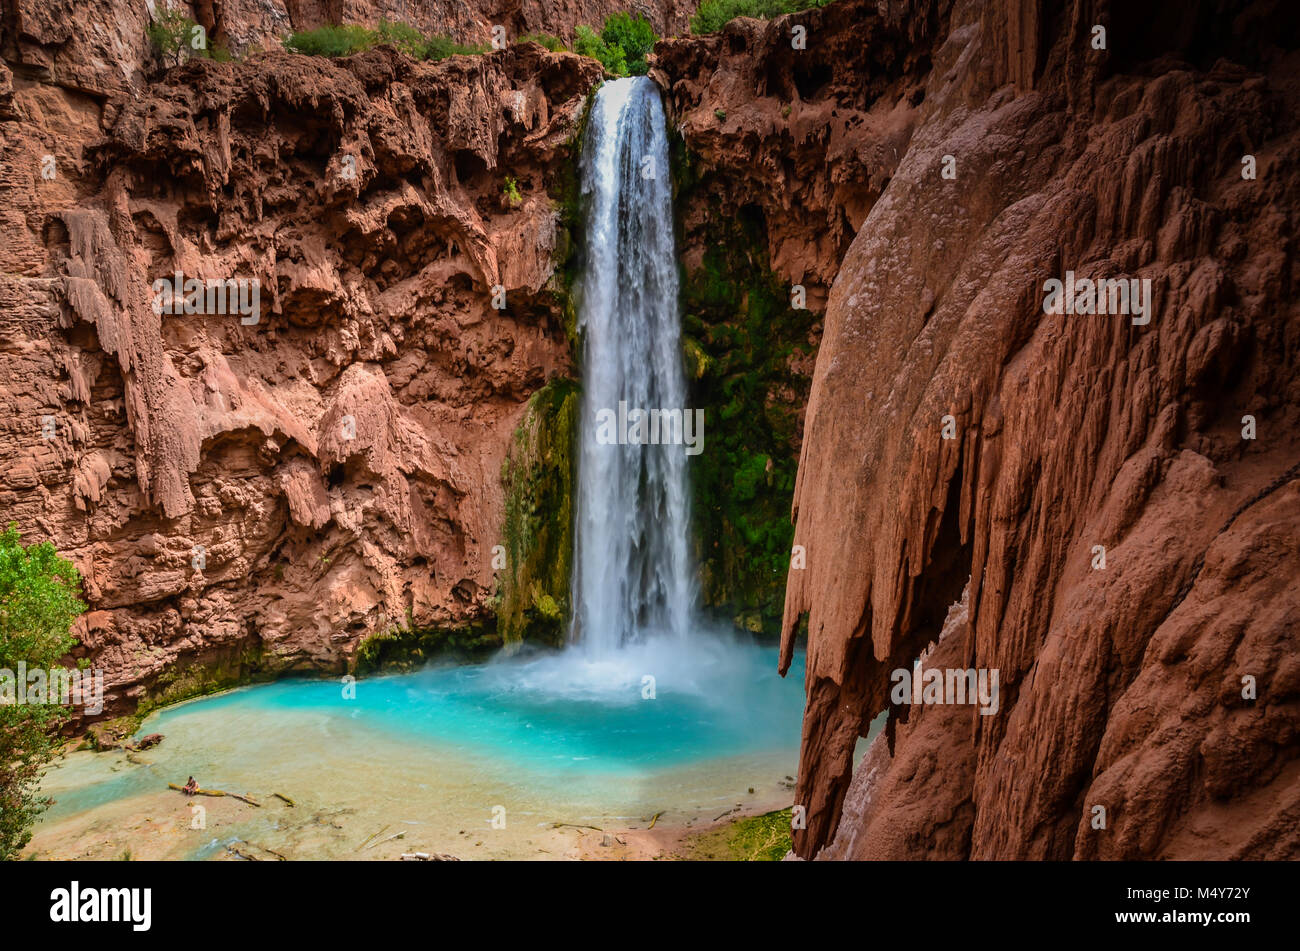 Turquoise blue Mooney Falls cascades down a 210 foot red rock wall. Stock Photo